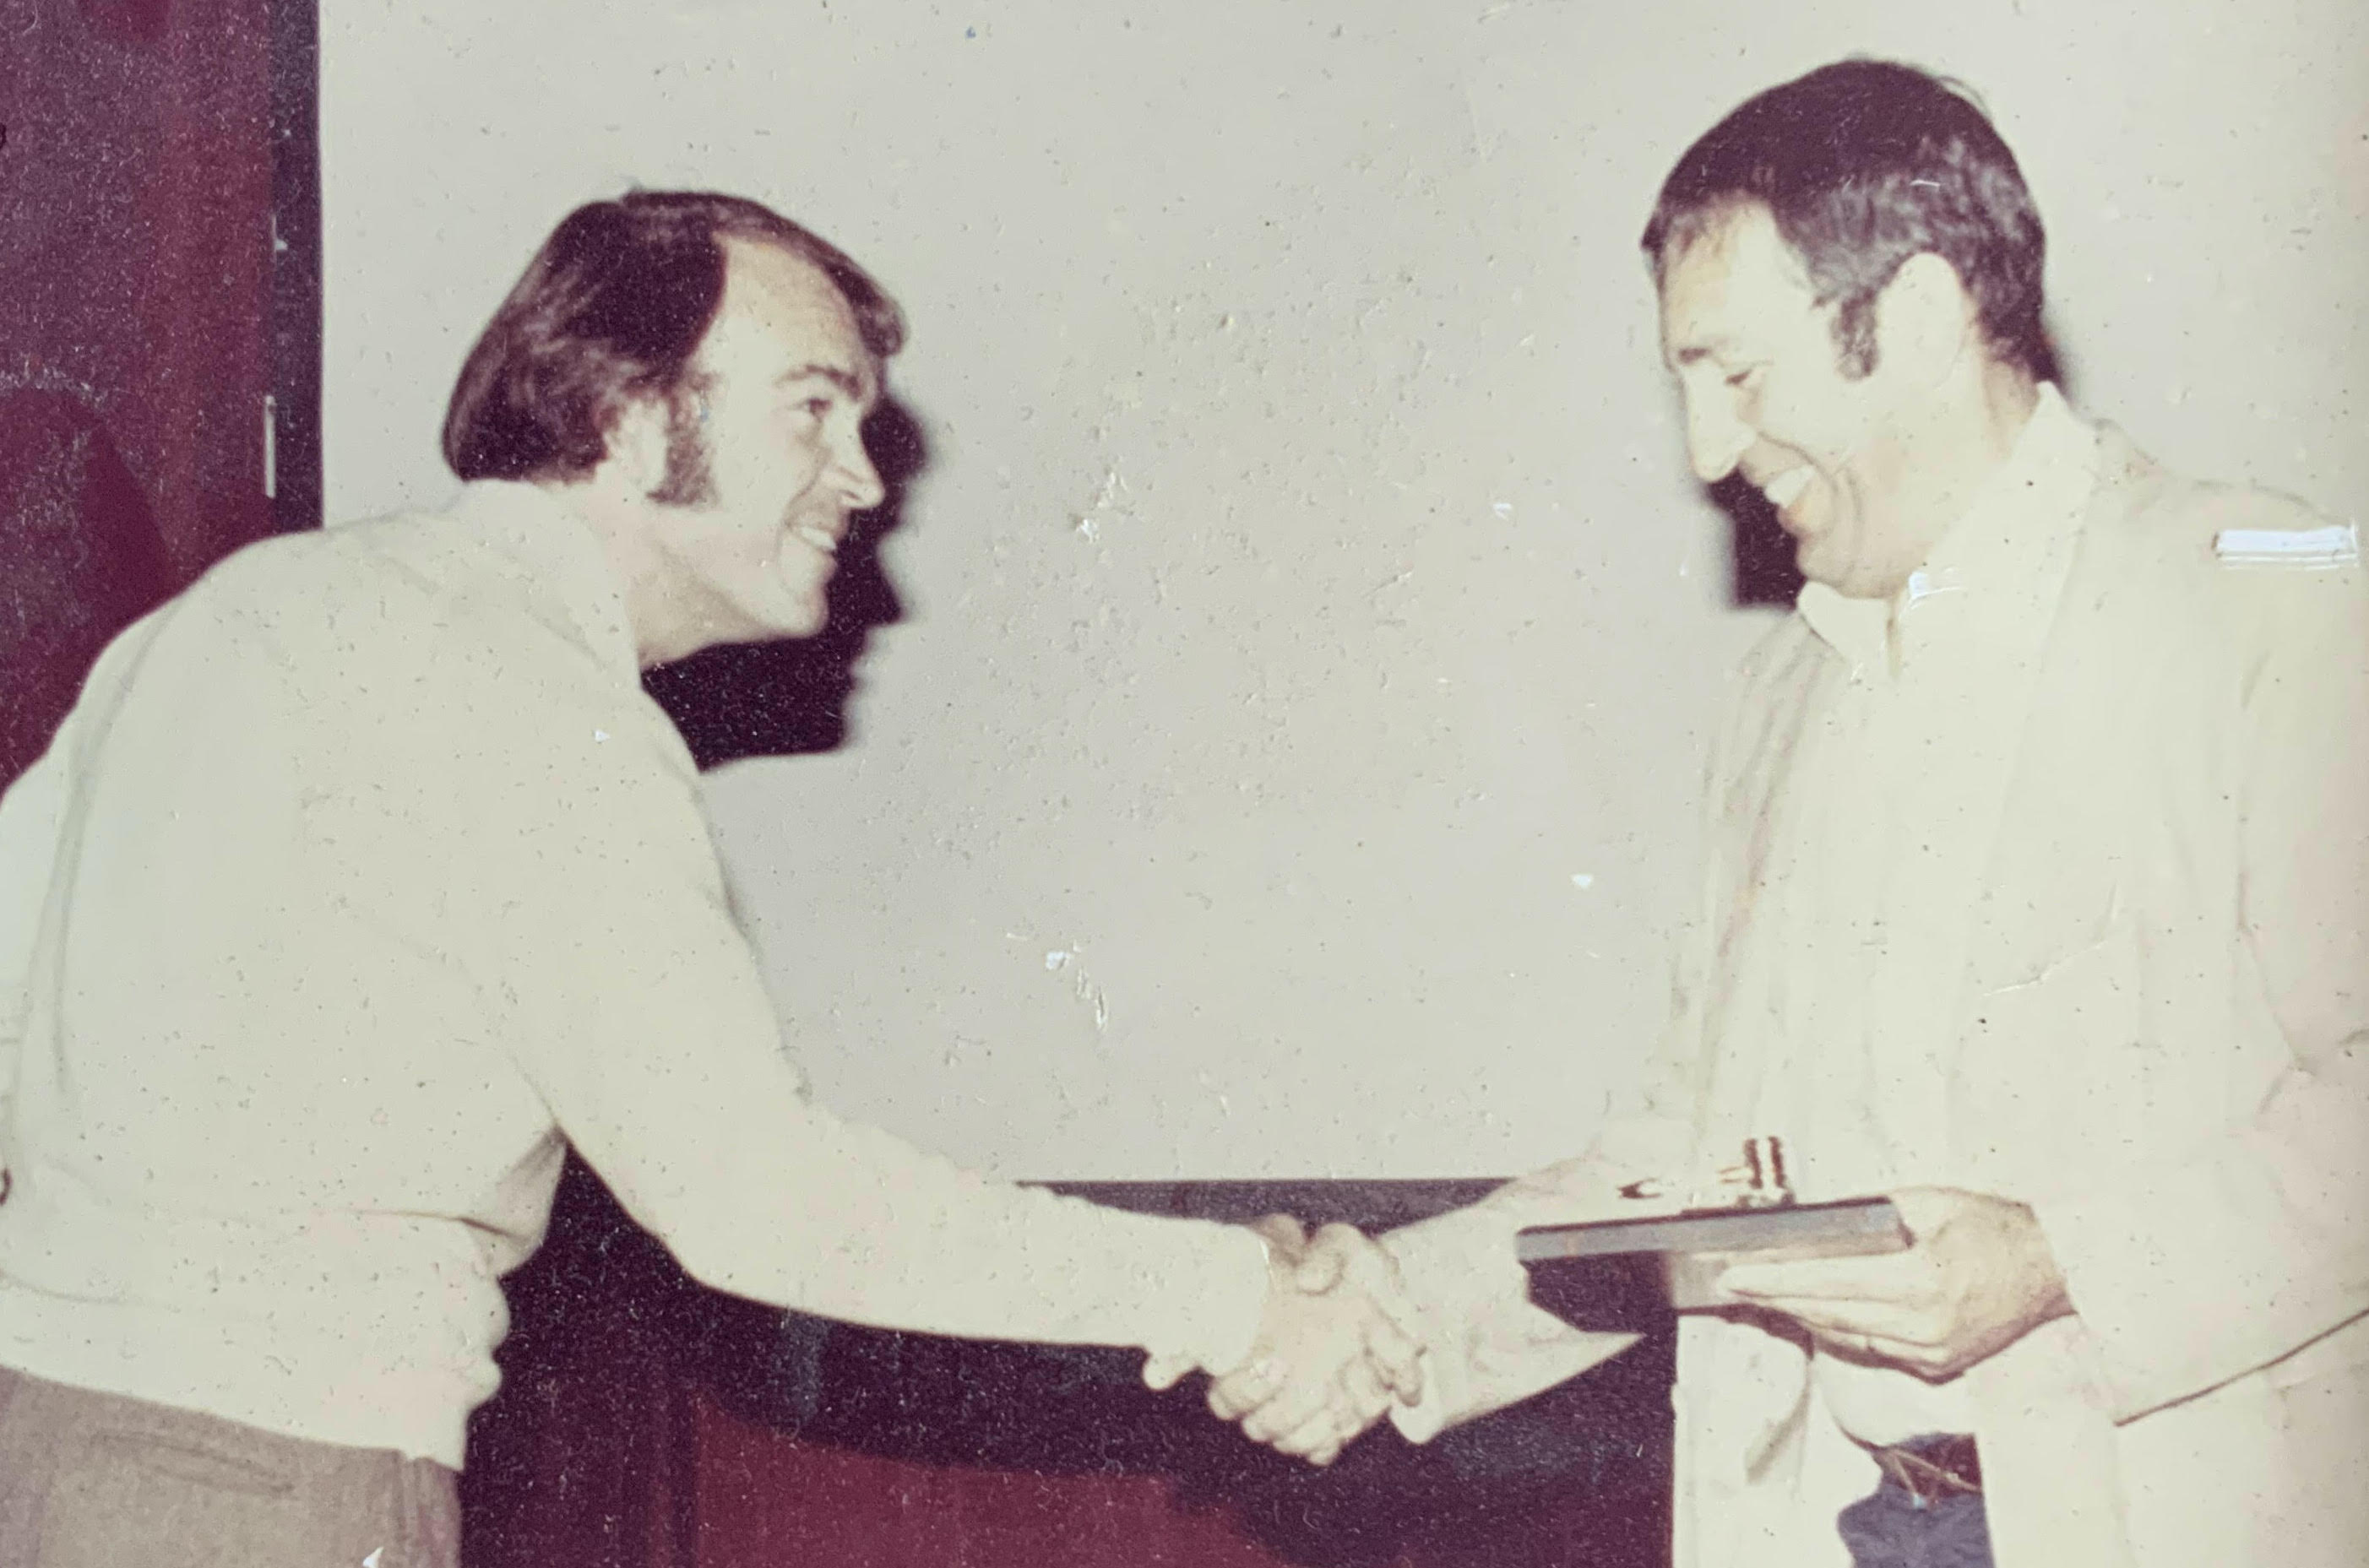 An old, slightly damaged photograph of Wayne Sailor and Lou Brown smiling at one another and shaking hands in front of a projector screen. Lou has a plaque and gavel that he is presenting to Wayne.